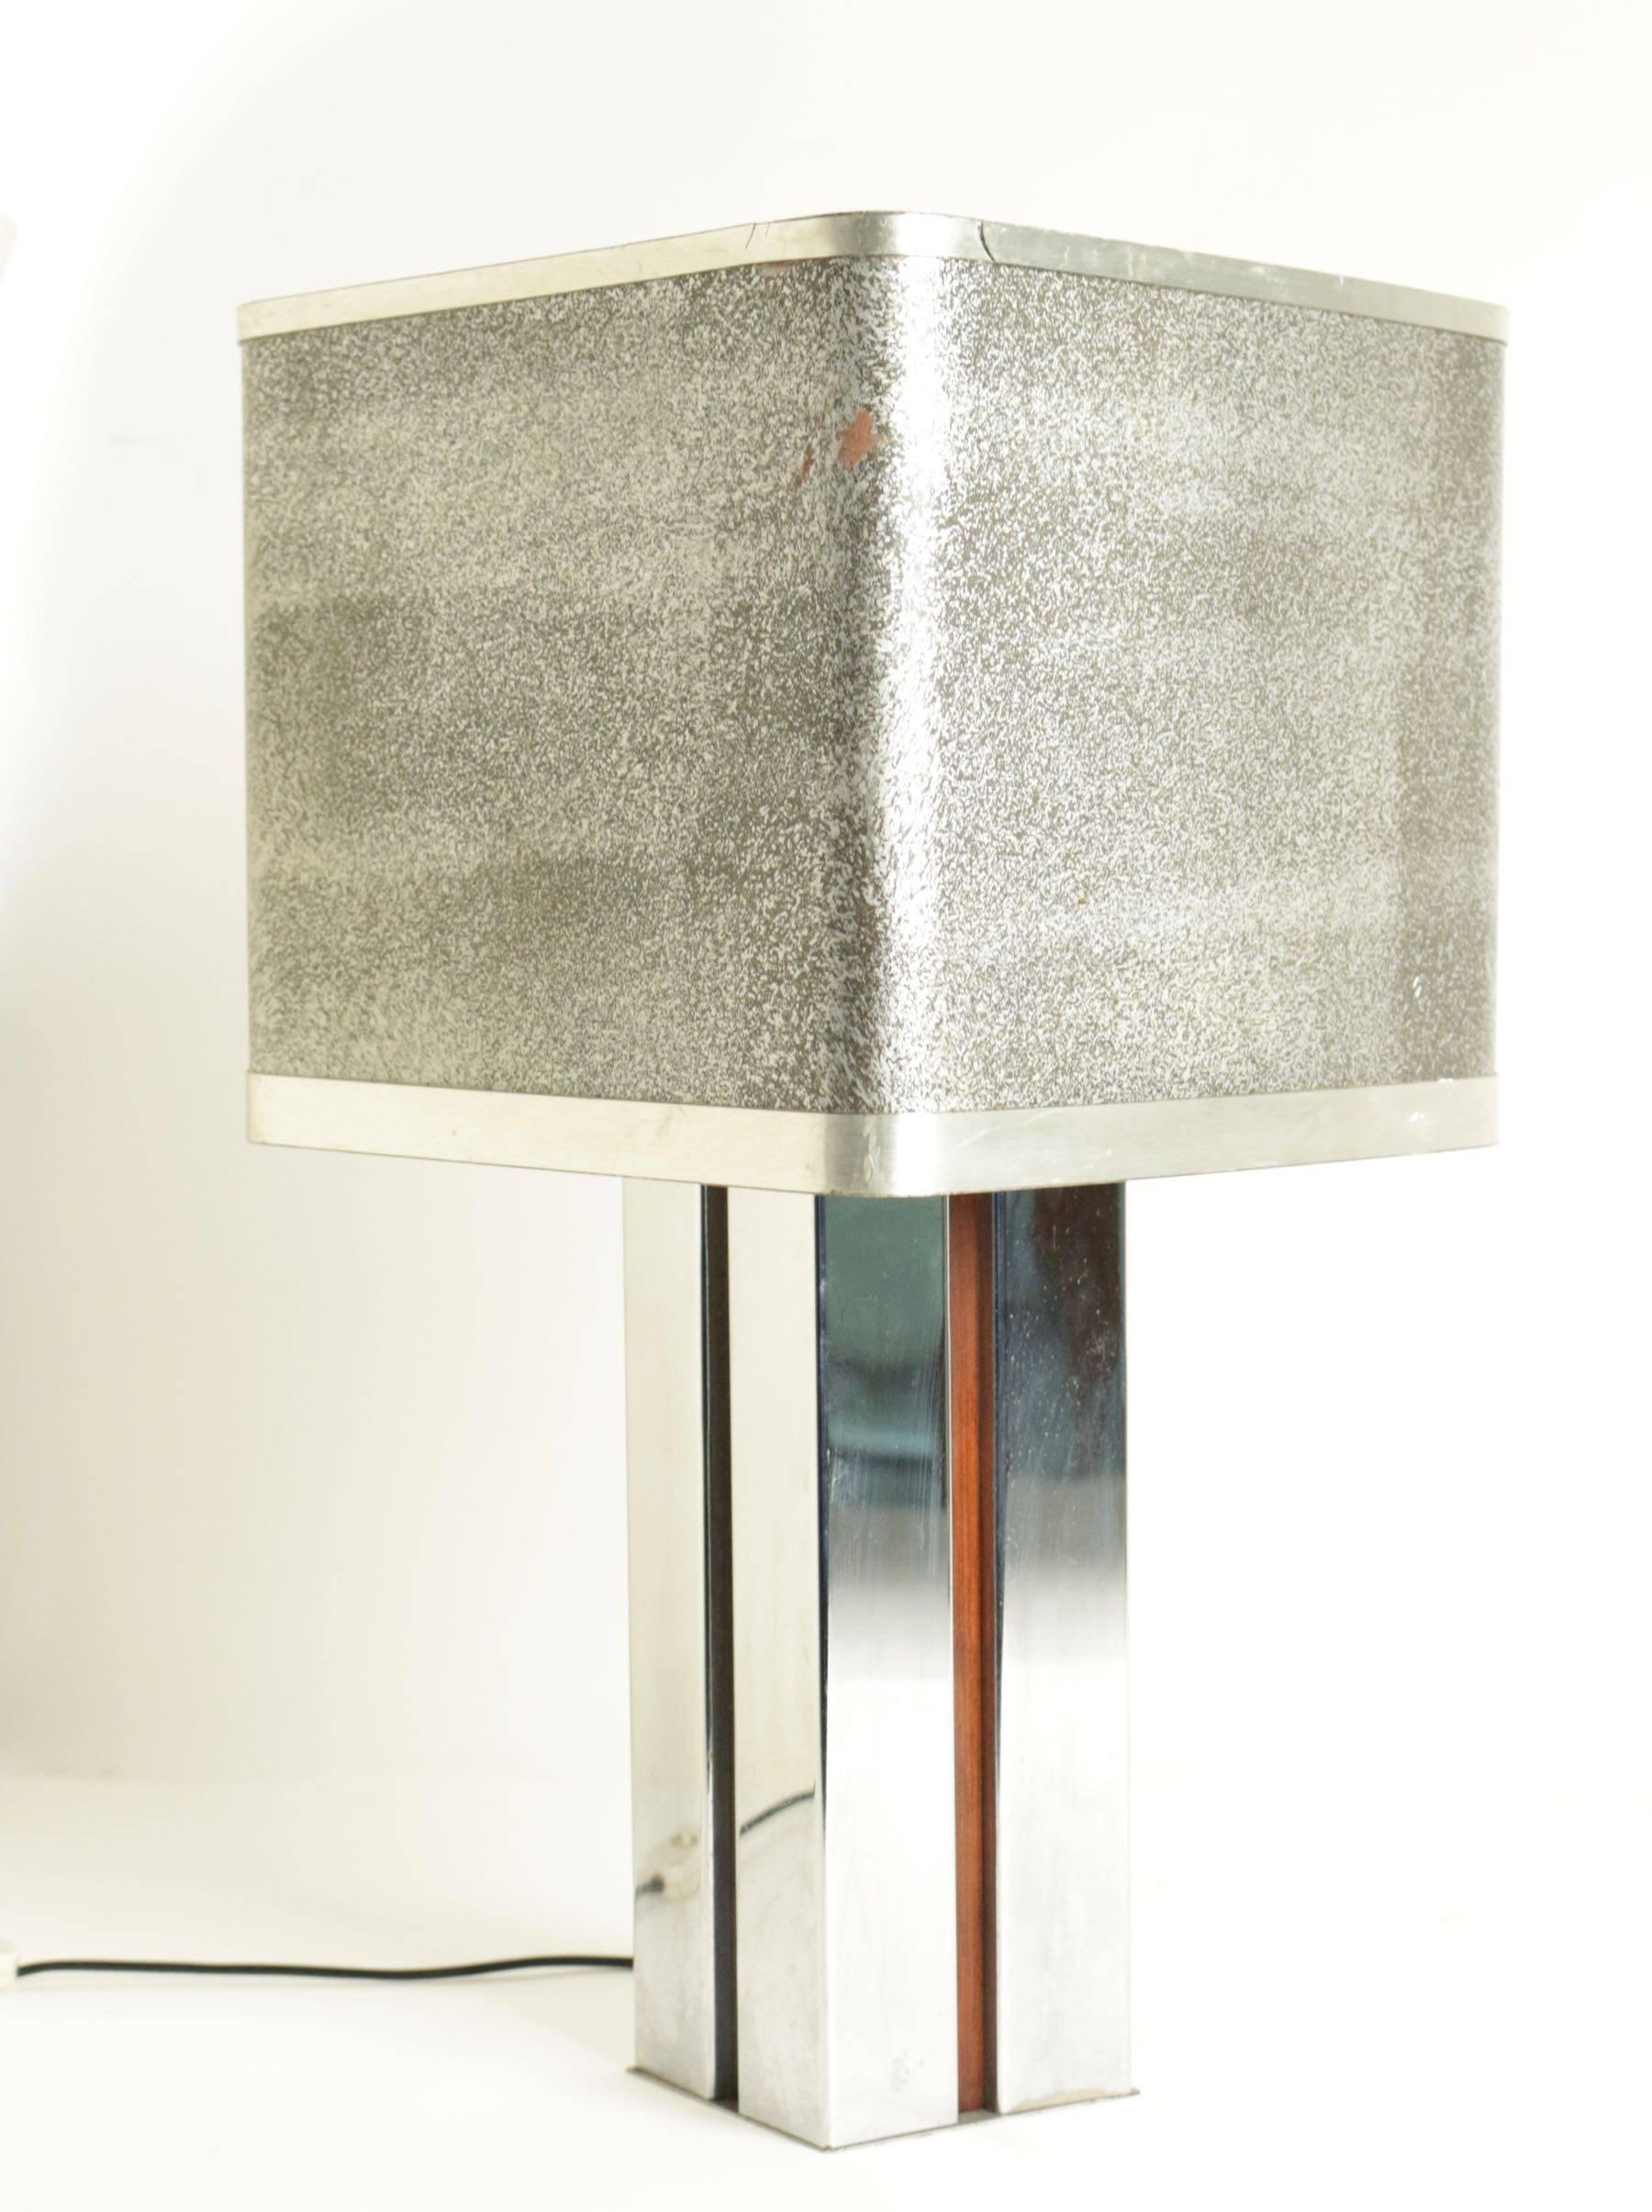 Aluminum desk lamp with square section.